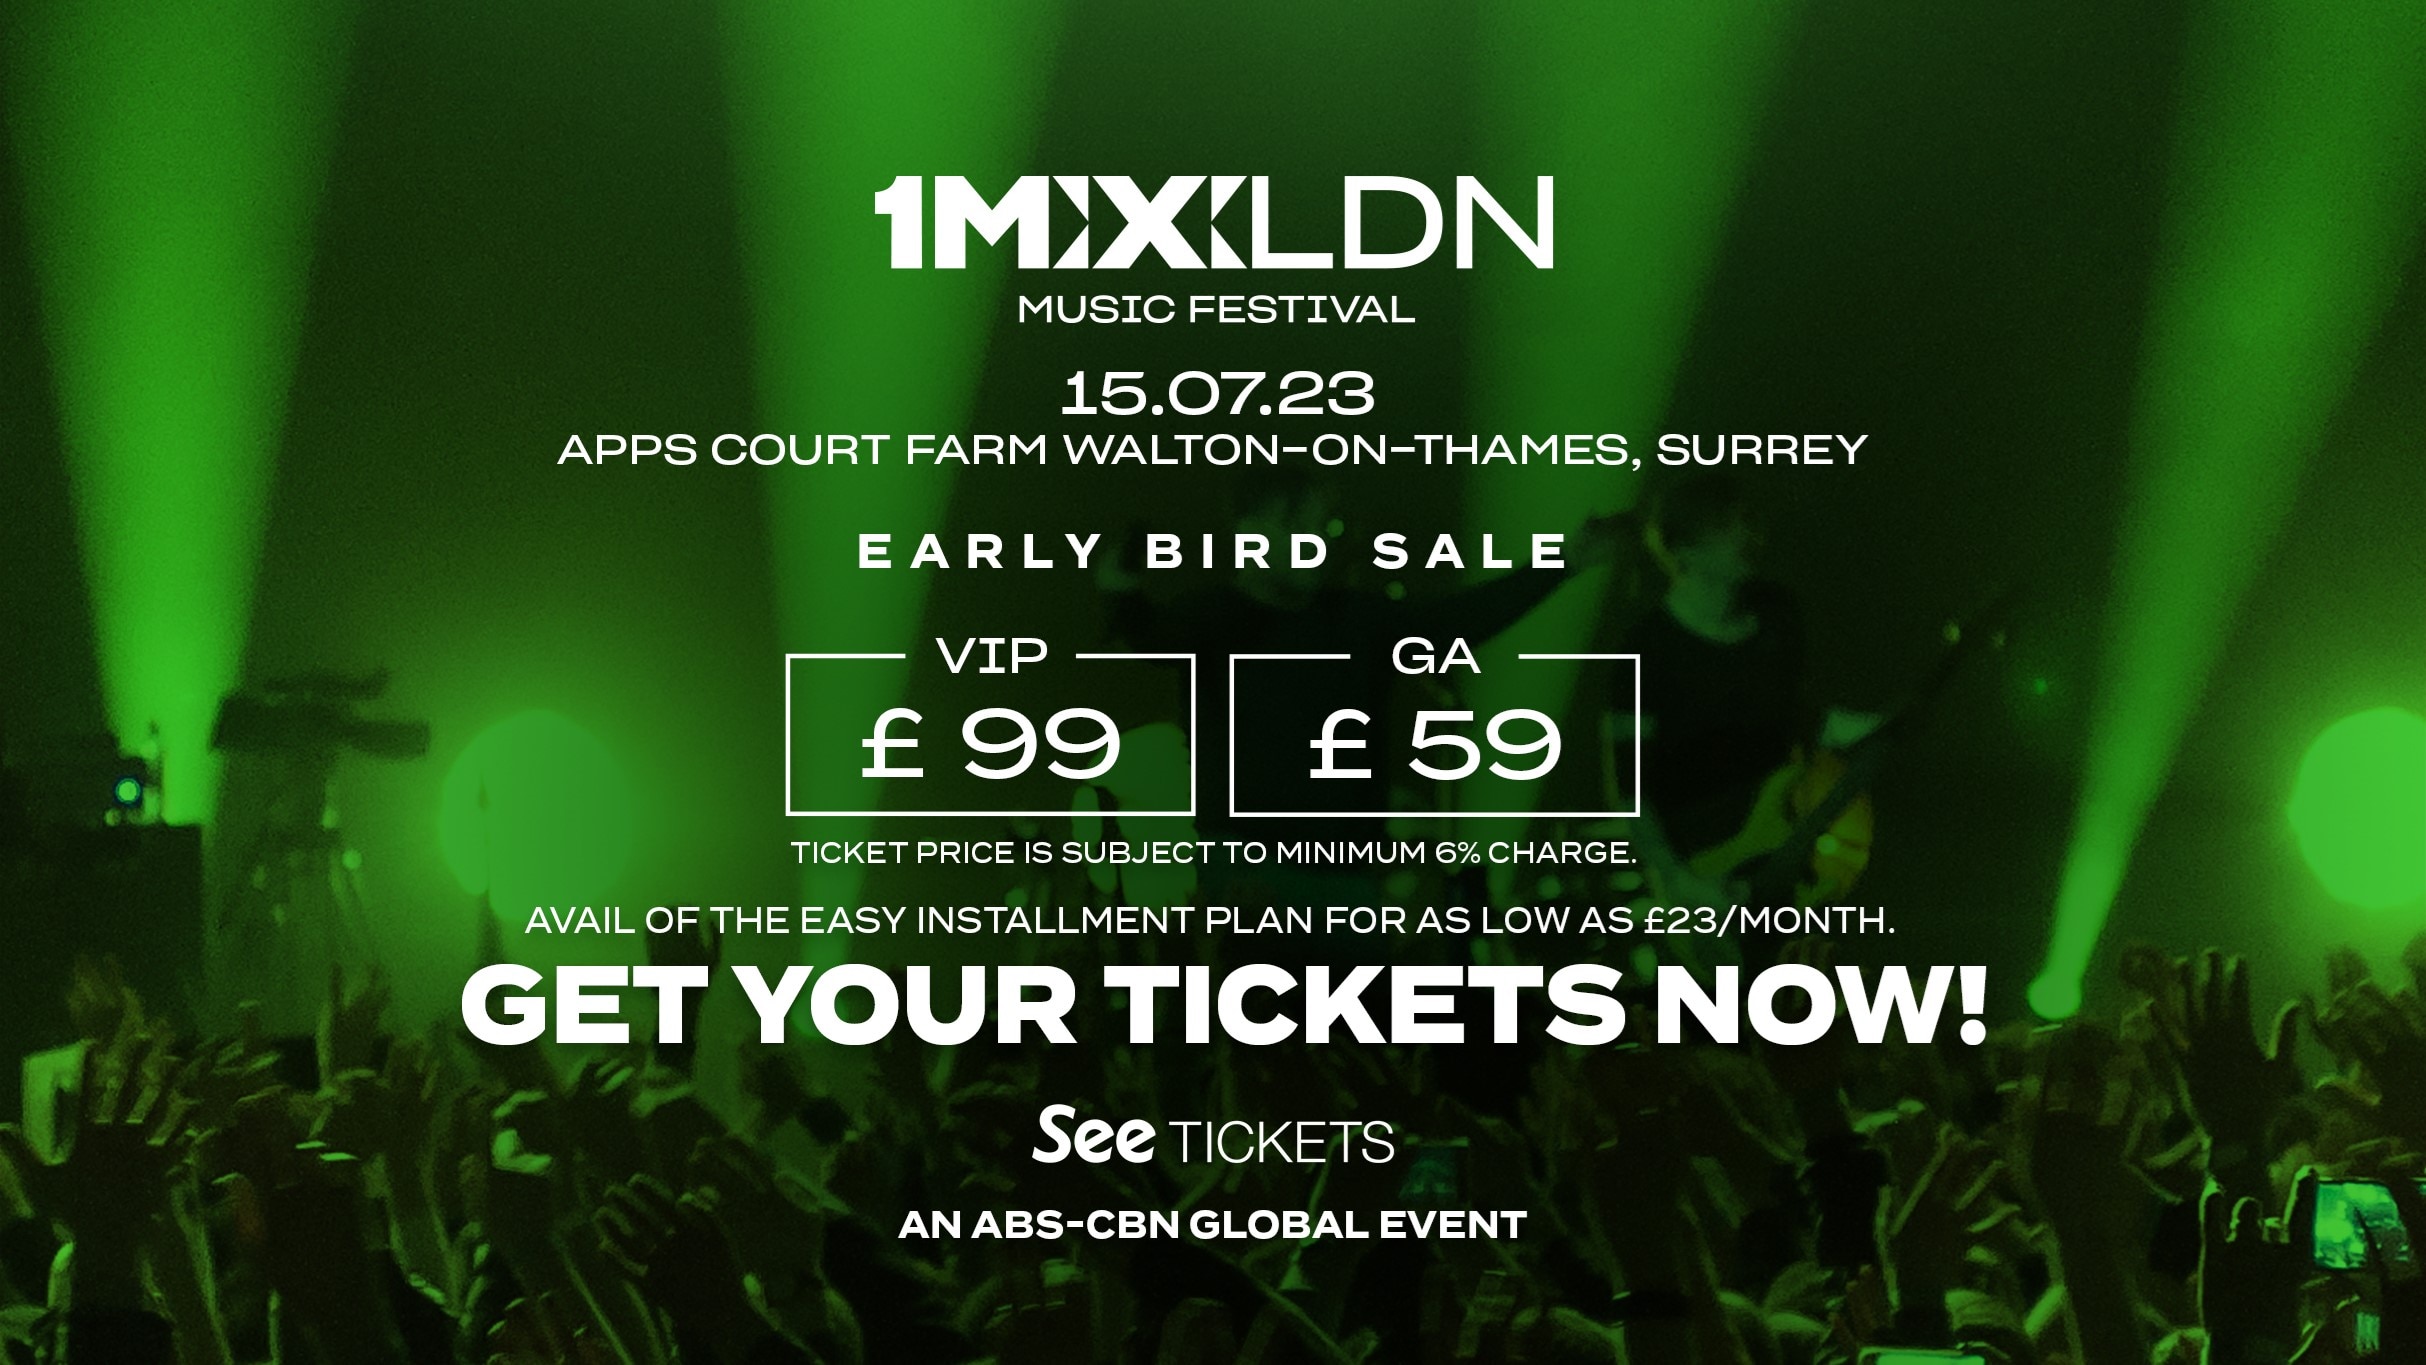 The new 1MX returns to London this July promising a specially curated music festival for the international audience